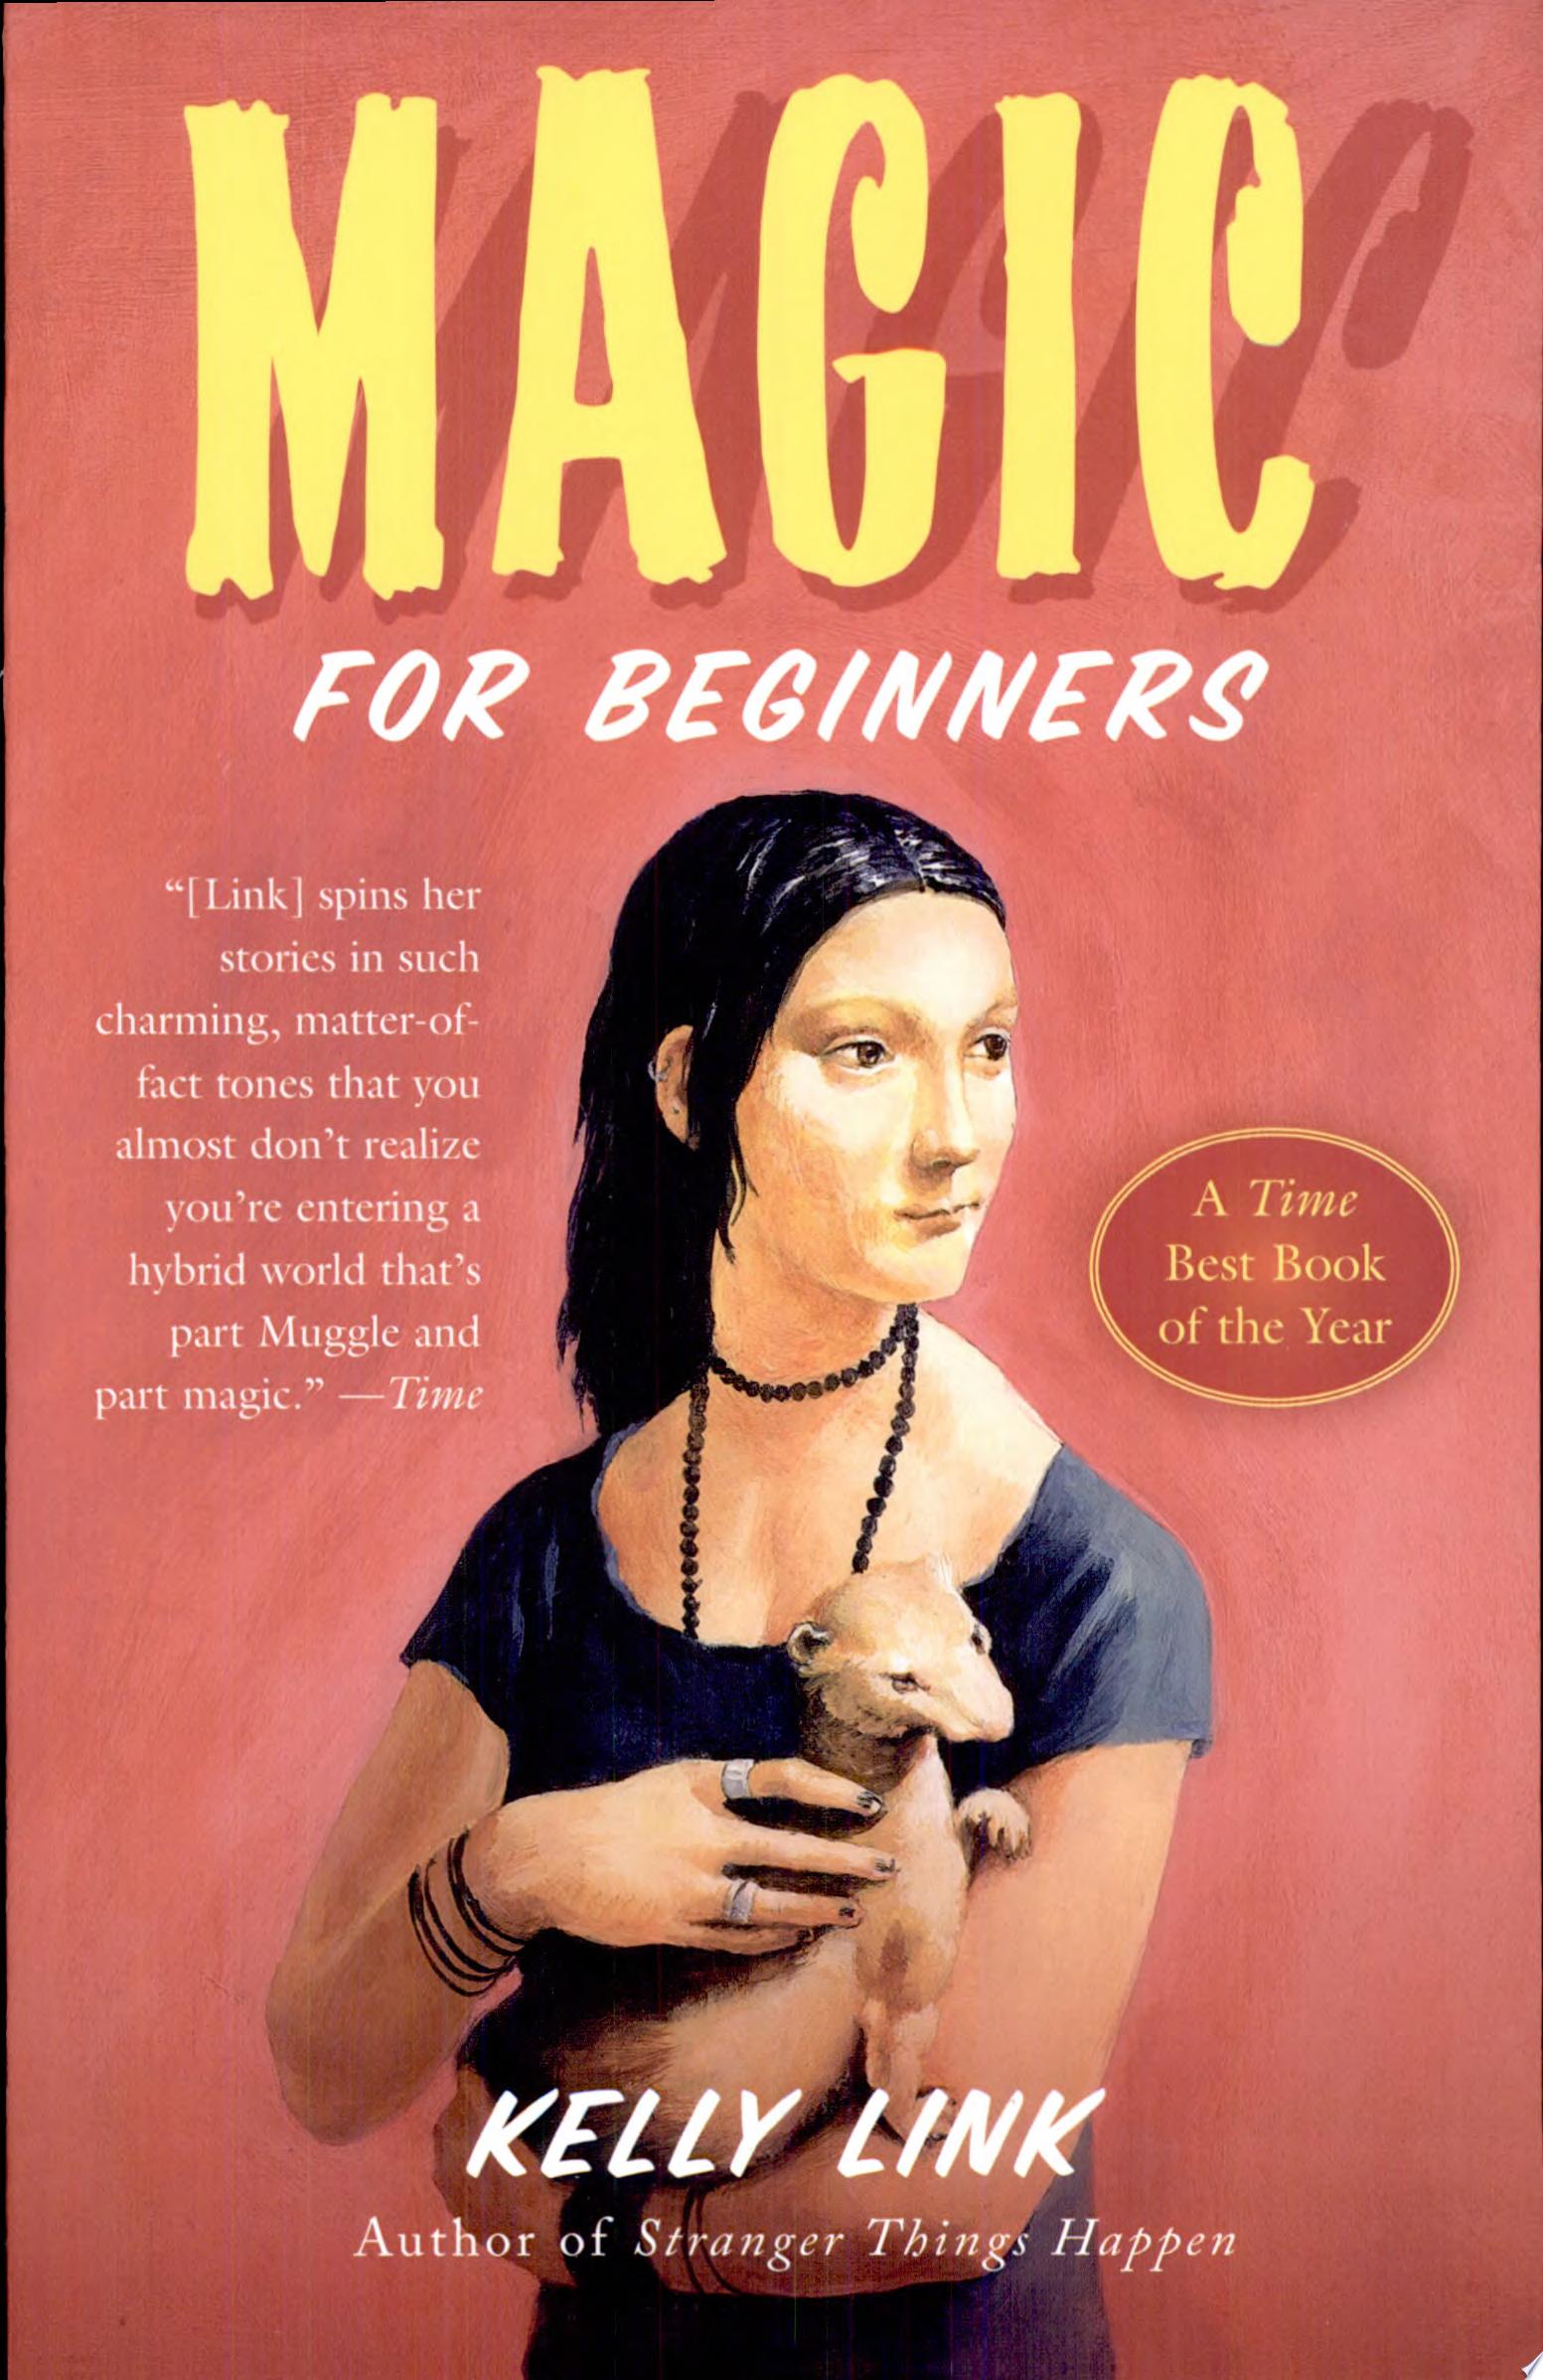 Image for "Magic for Beginners"